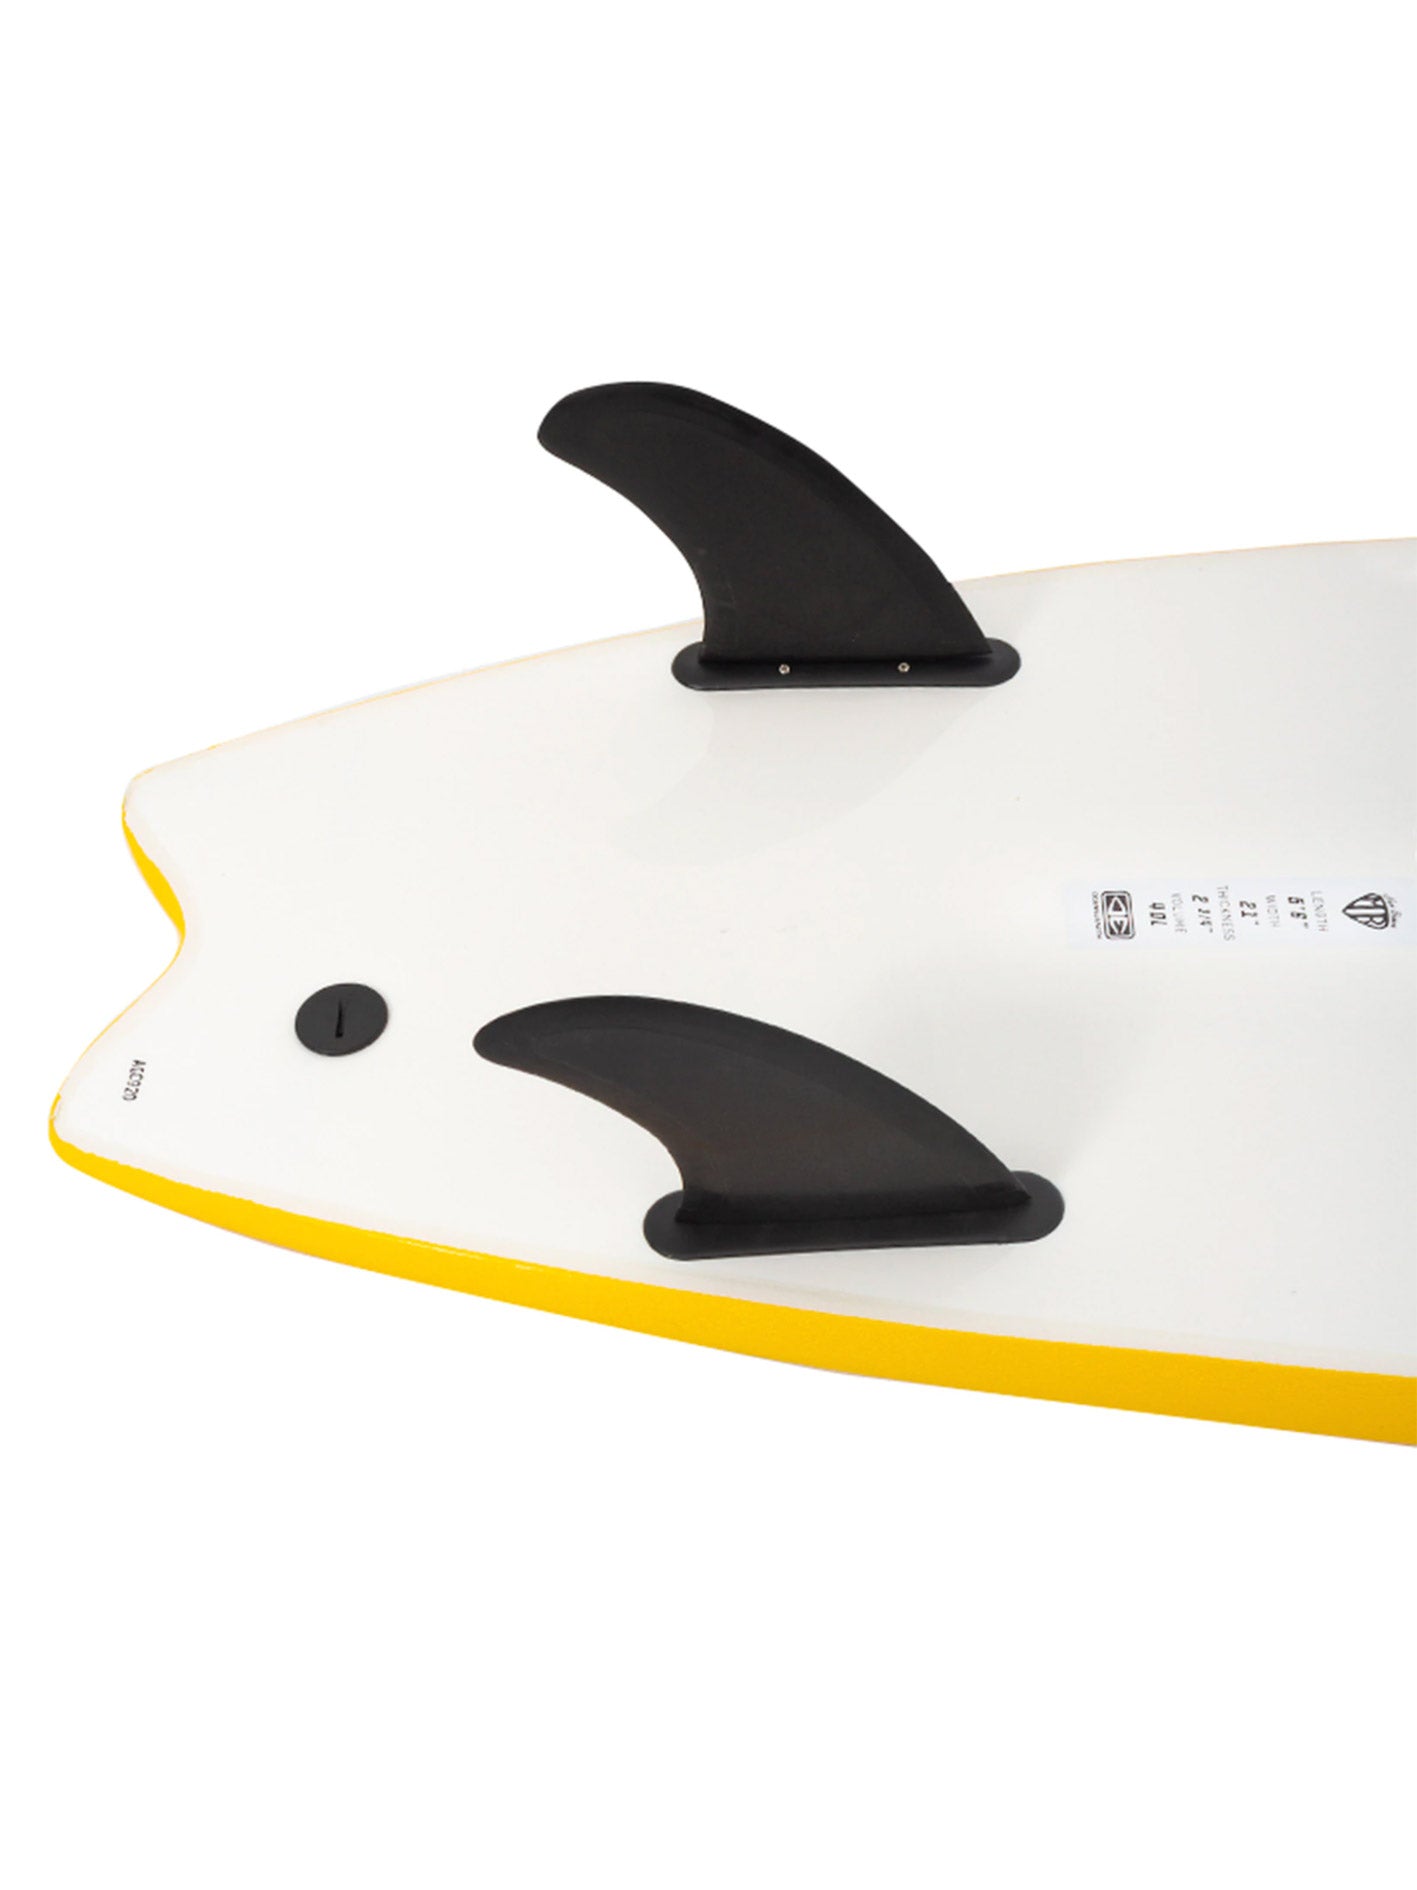 Ocean And Earth 5 6 Mr Ezi Rider Twin Fin Available Today With Free Shipping